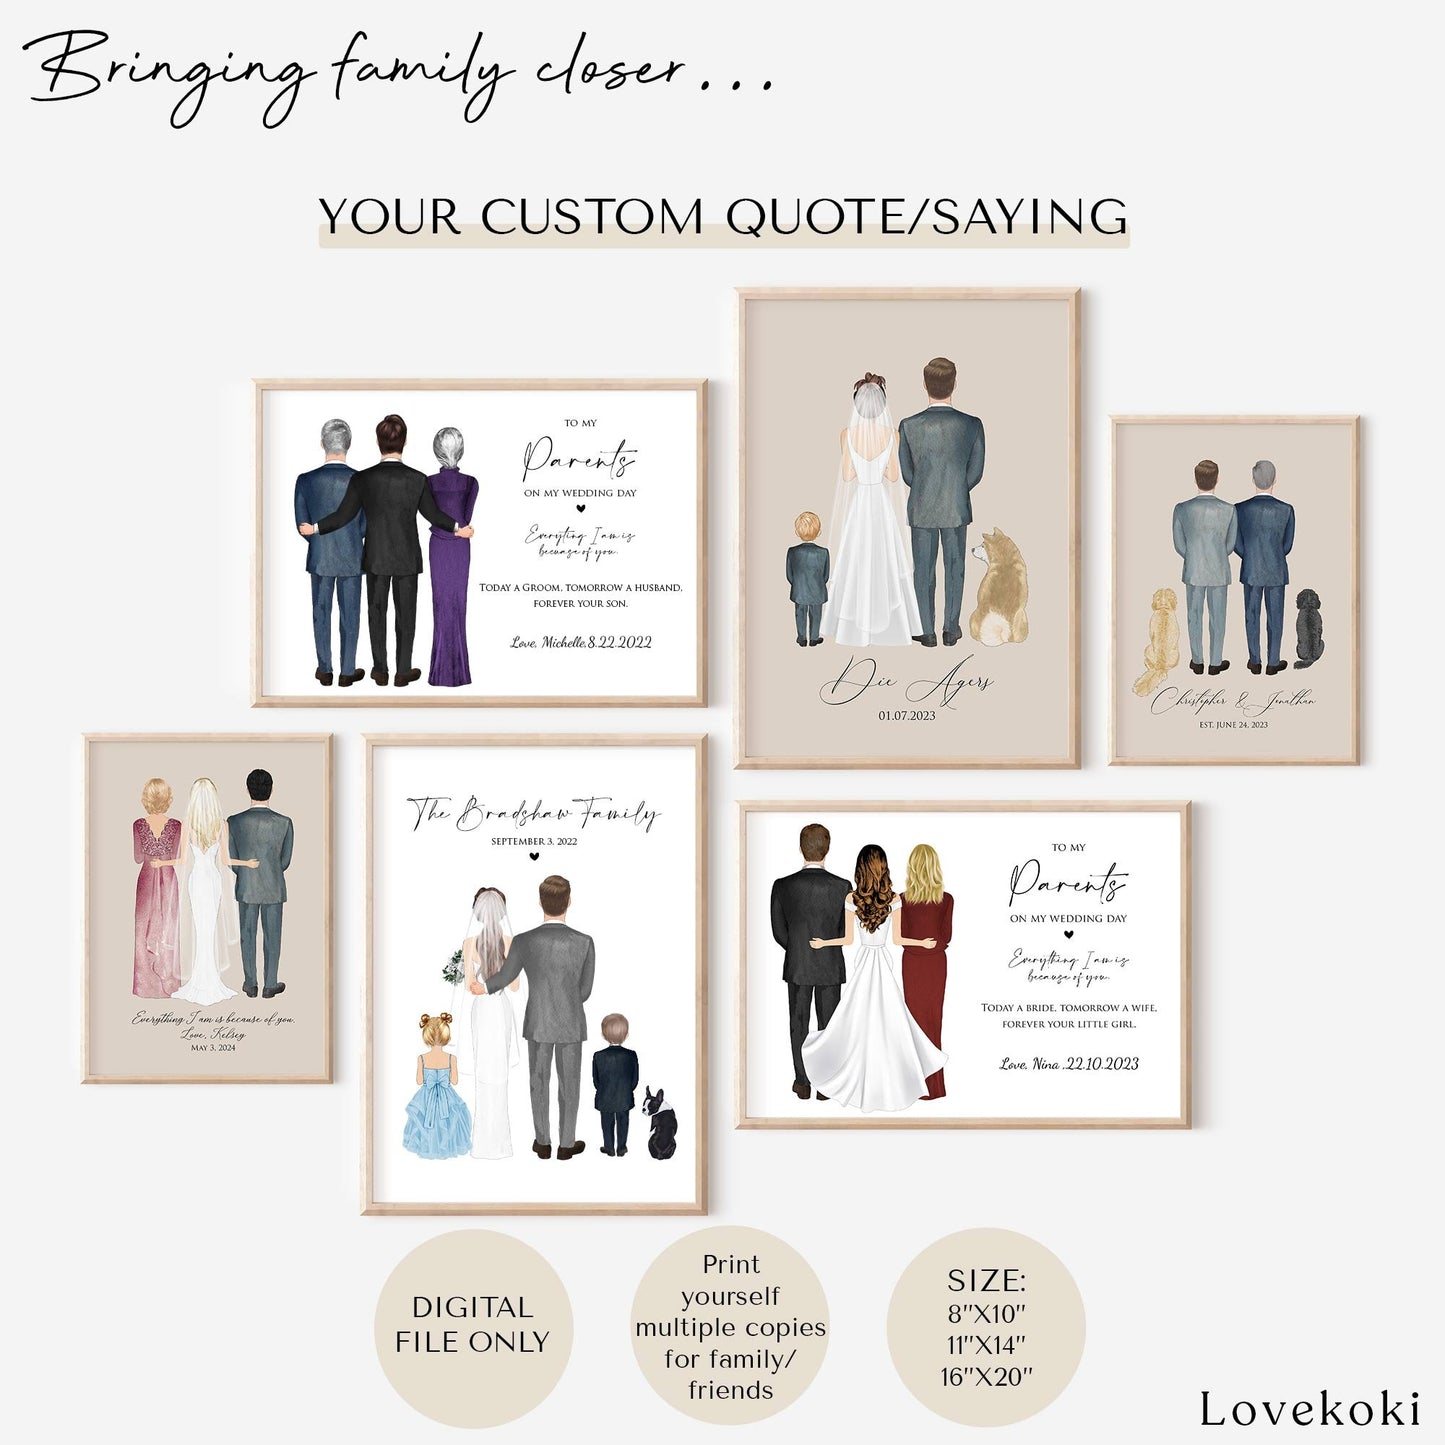 Wedding Illustration Wall Art Gift for Parents of the Groom on Wedding Day